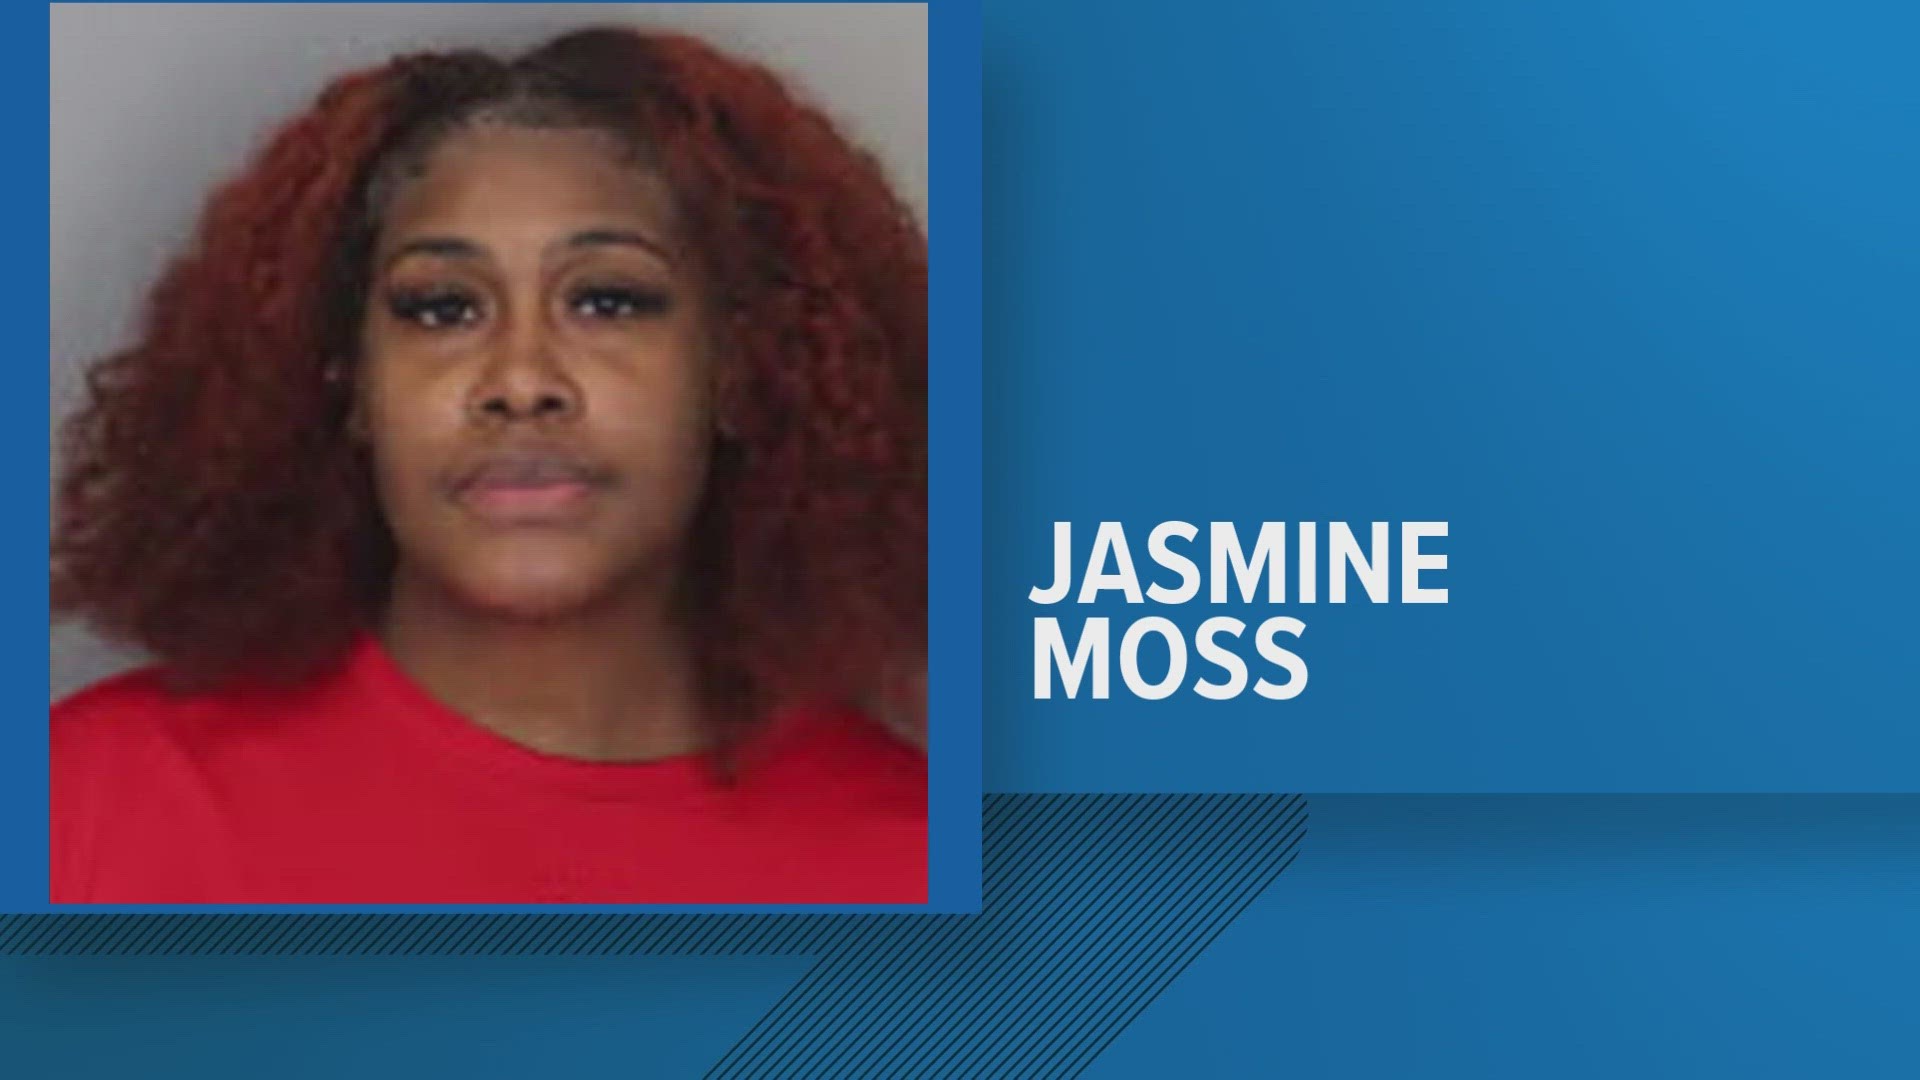 Investigators charged Jasmine Moss with Child Neglect. Police say last week they got several calls about disturbing images involving a young girl on social media.